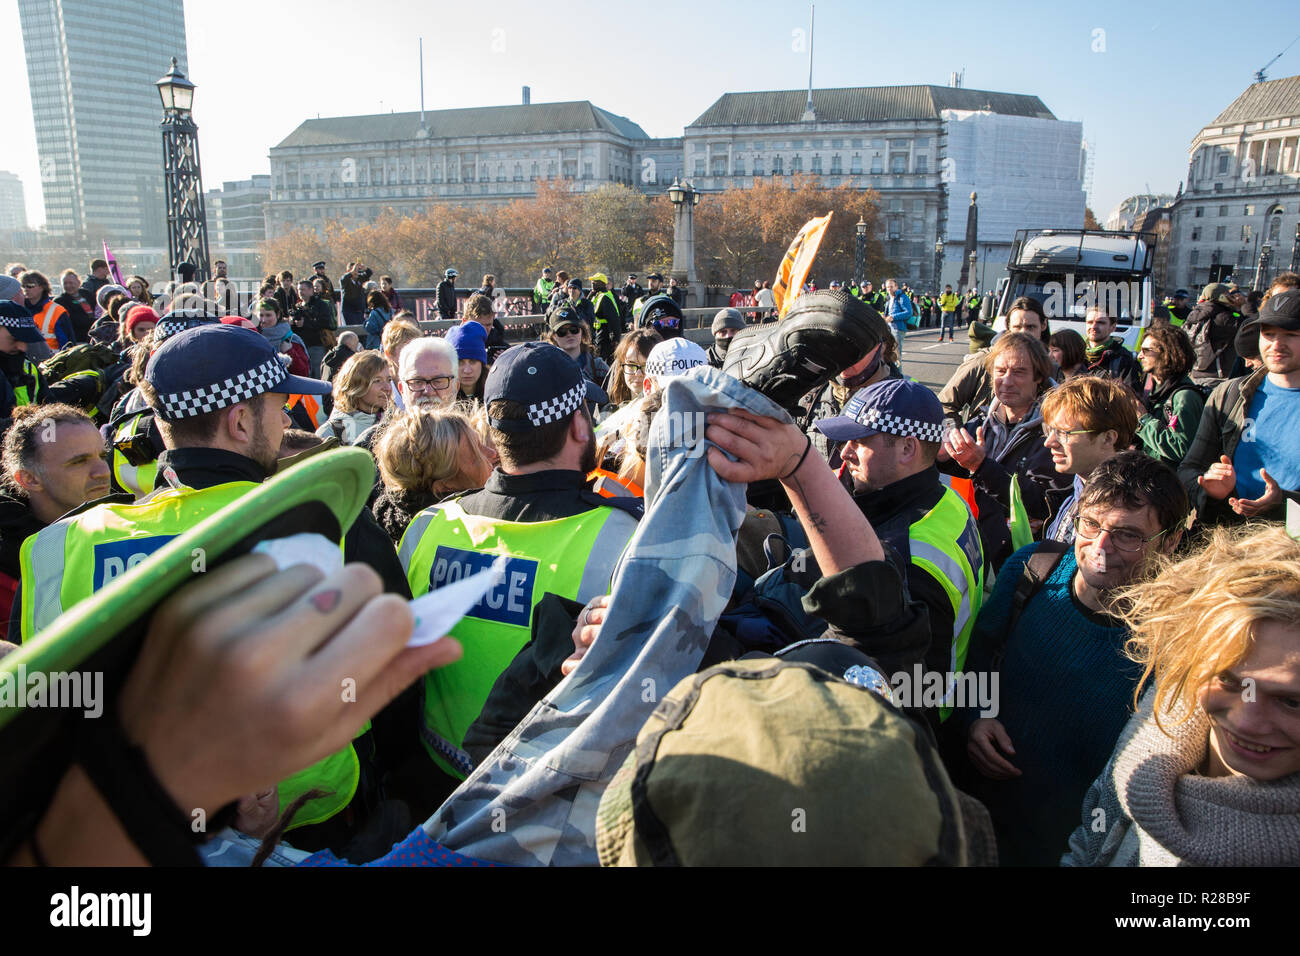 London, UK. 17th November, 2018. Police officers arrest a man after environmental campaigners from Extinction Rebellion blocked Lambeth Bridge, one of five bridges blocked in central London, as part of a Rebellion Day event to highlight 'criminal inaction in the face of climate change catastrophe and ecological collapse' by the UK Government as part of a programme of civil disobedience during which scores of campaigners have been arrested. Clowns from Clandestine Insurgent Rebel Clown Army (CIRCA follow them. Credit: Mark Kerrison/Alamy Live News Stock Photo